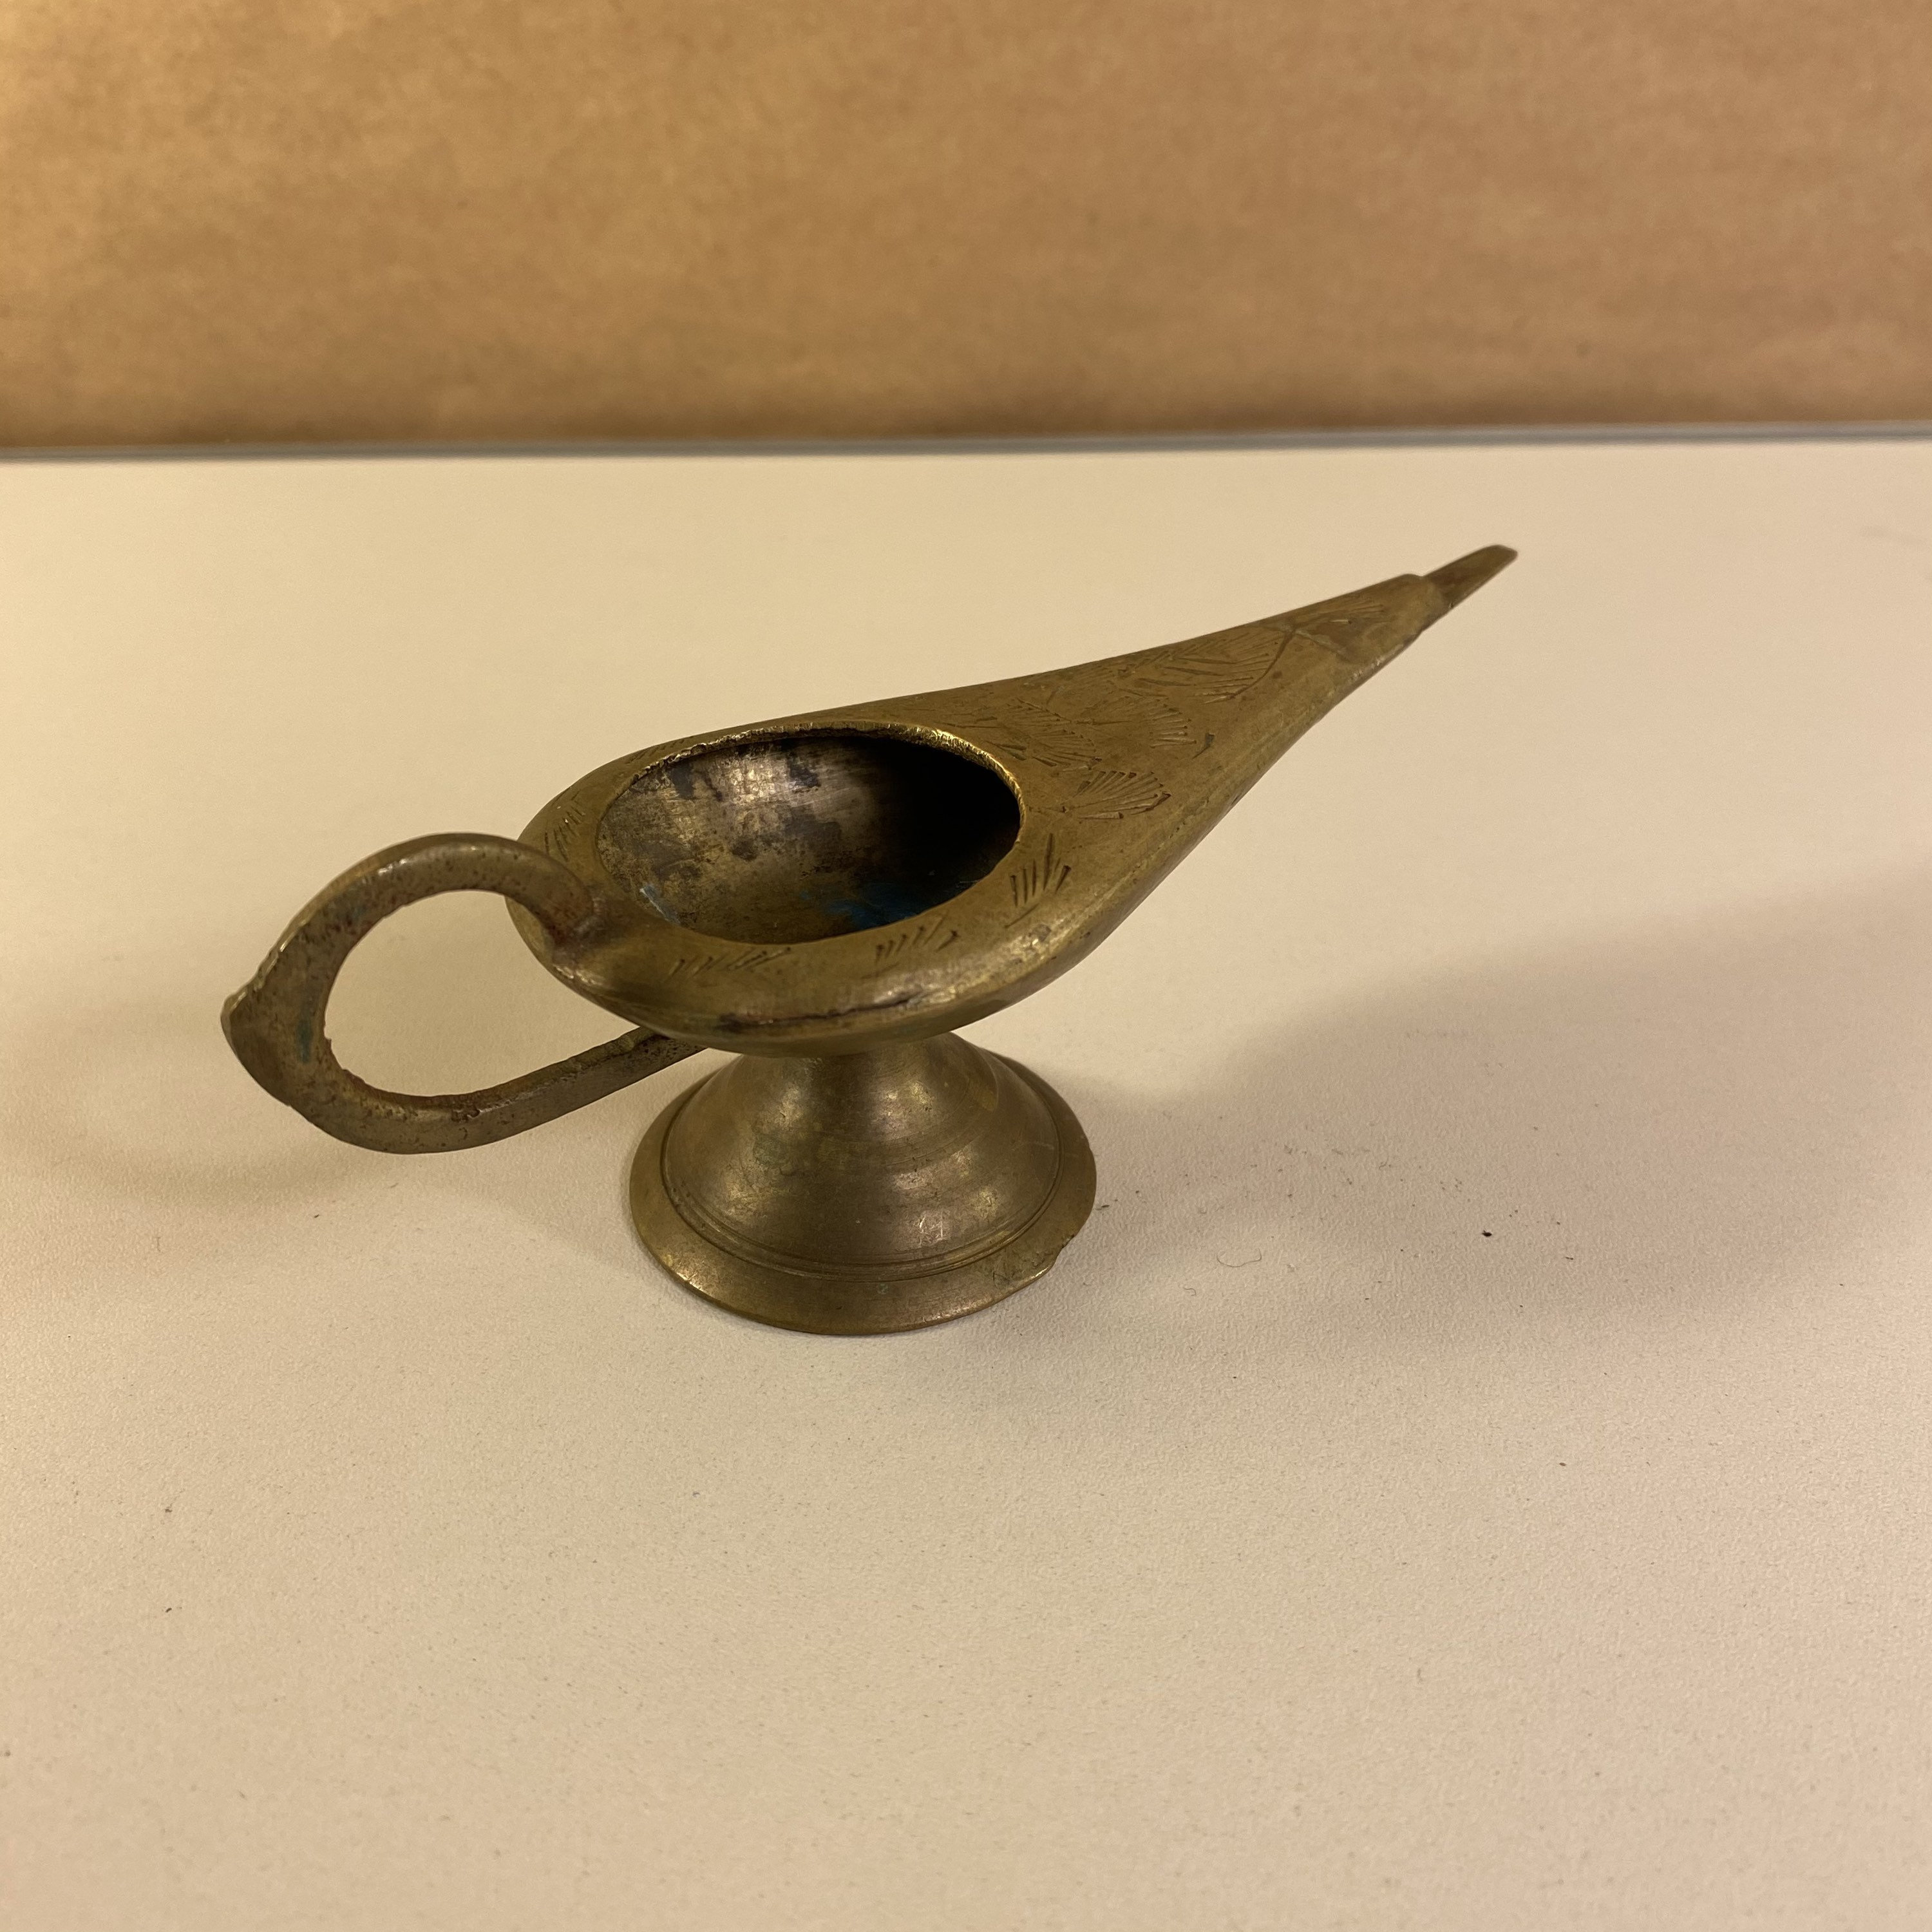 Brass Incense Genie Lamp, Unique Incense Burner, India Brass, Solid Metal,  Cute Little Incense Dish, Unusual Incense Holder, Free Shipping 